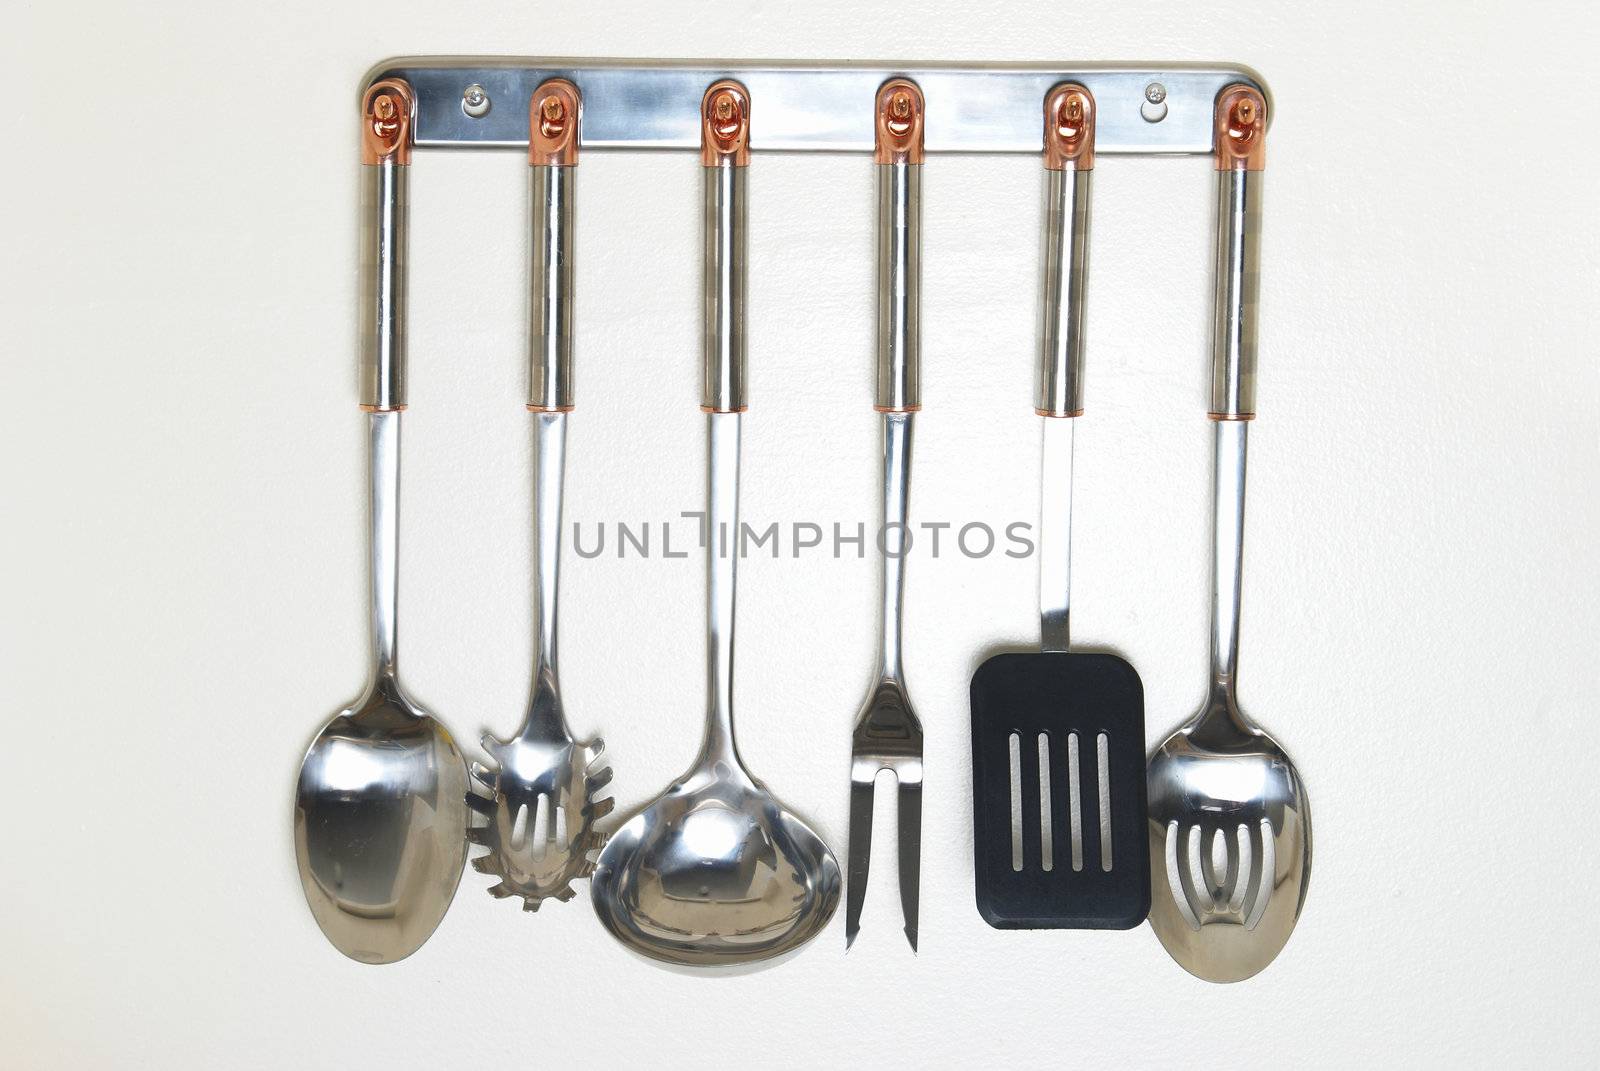 A rack of kitchen utensils hanging on the wall.